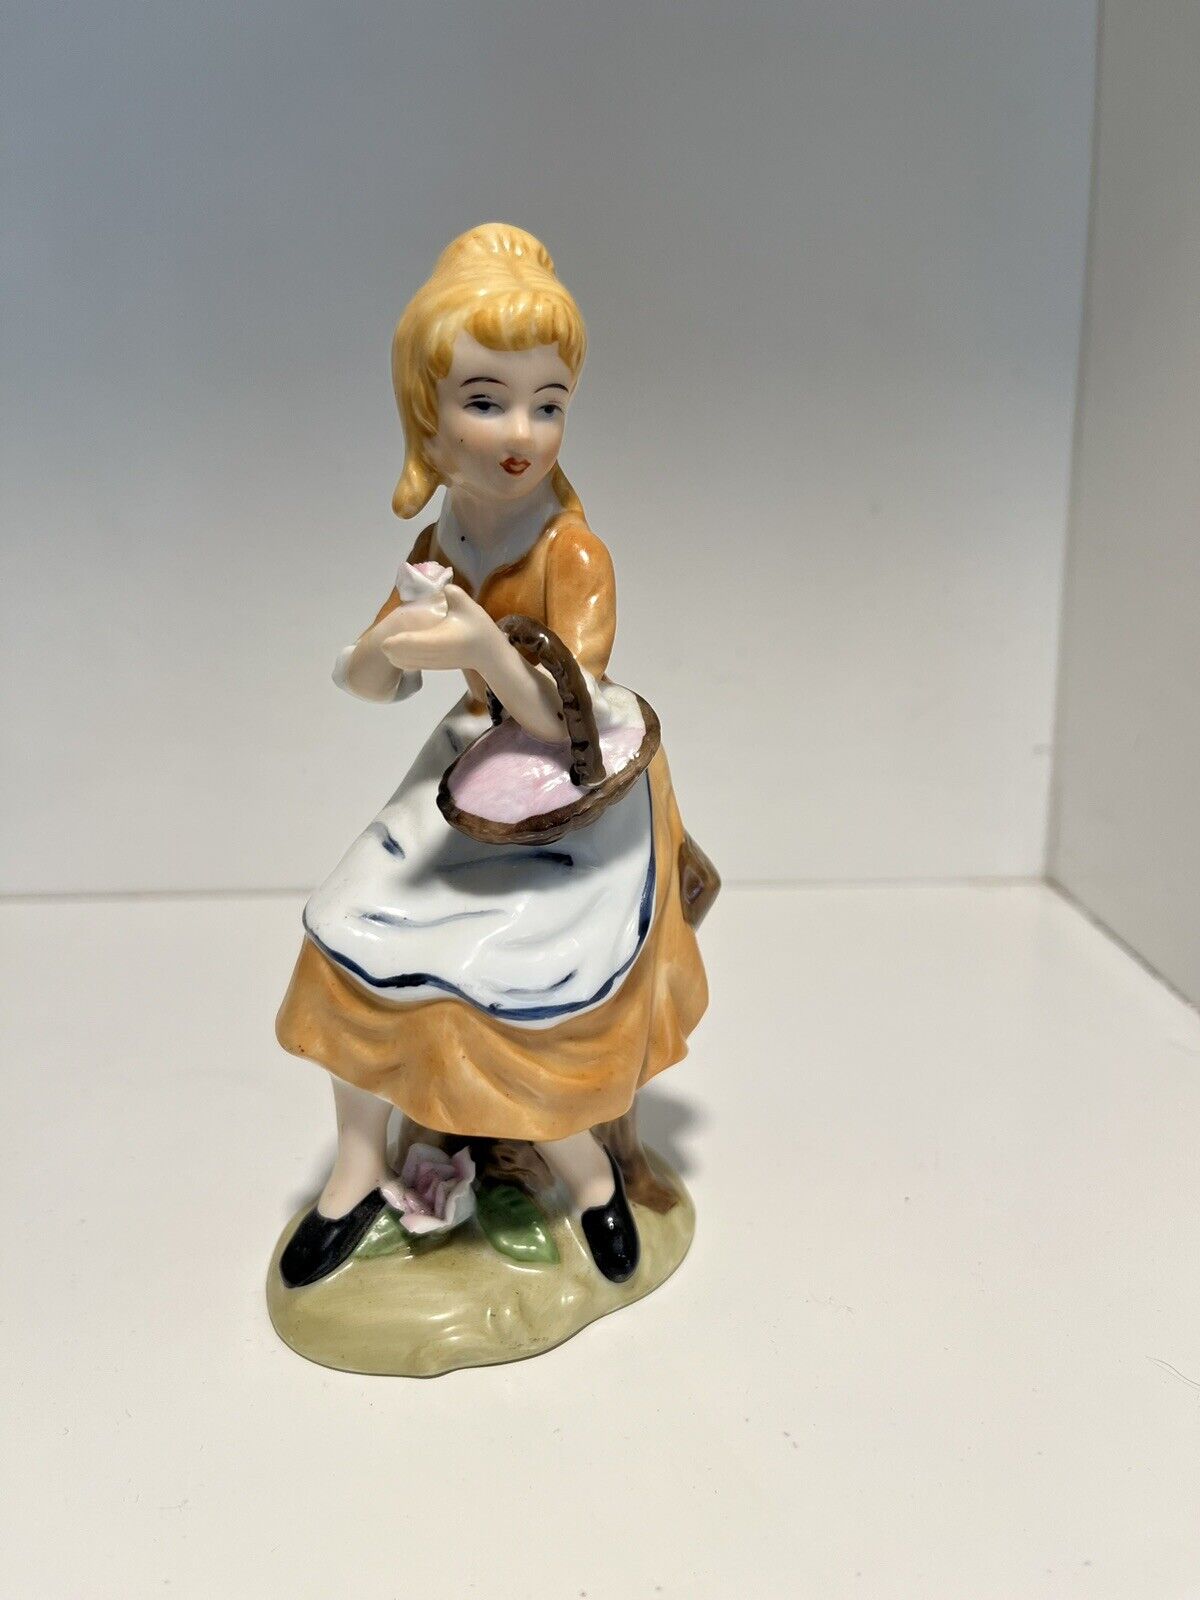 Vintage Girl In Orange Dress Holding Flowers And Basket 6” Hand Painted